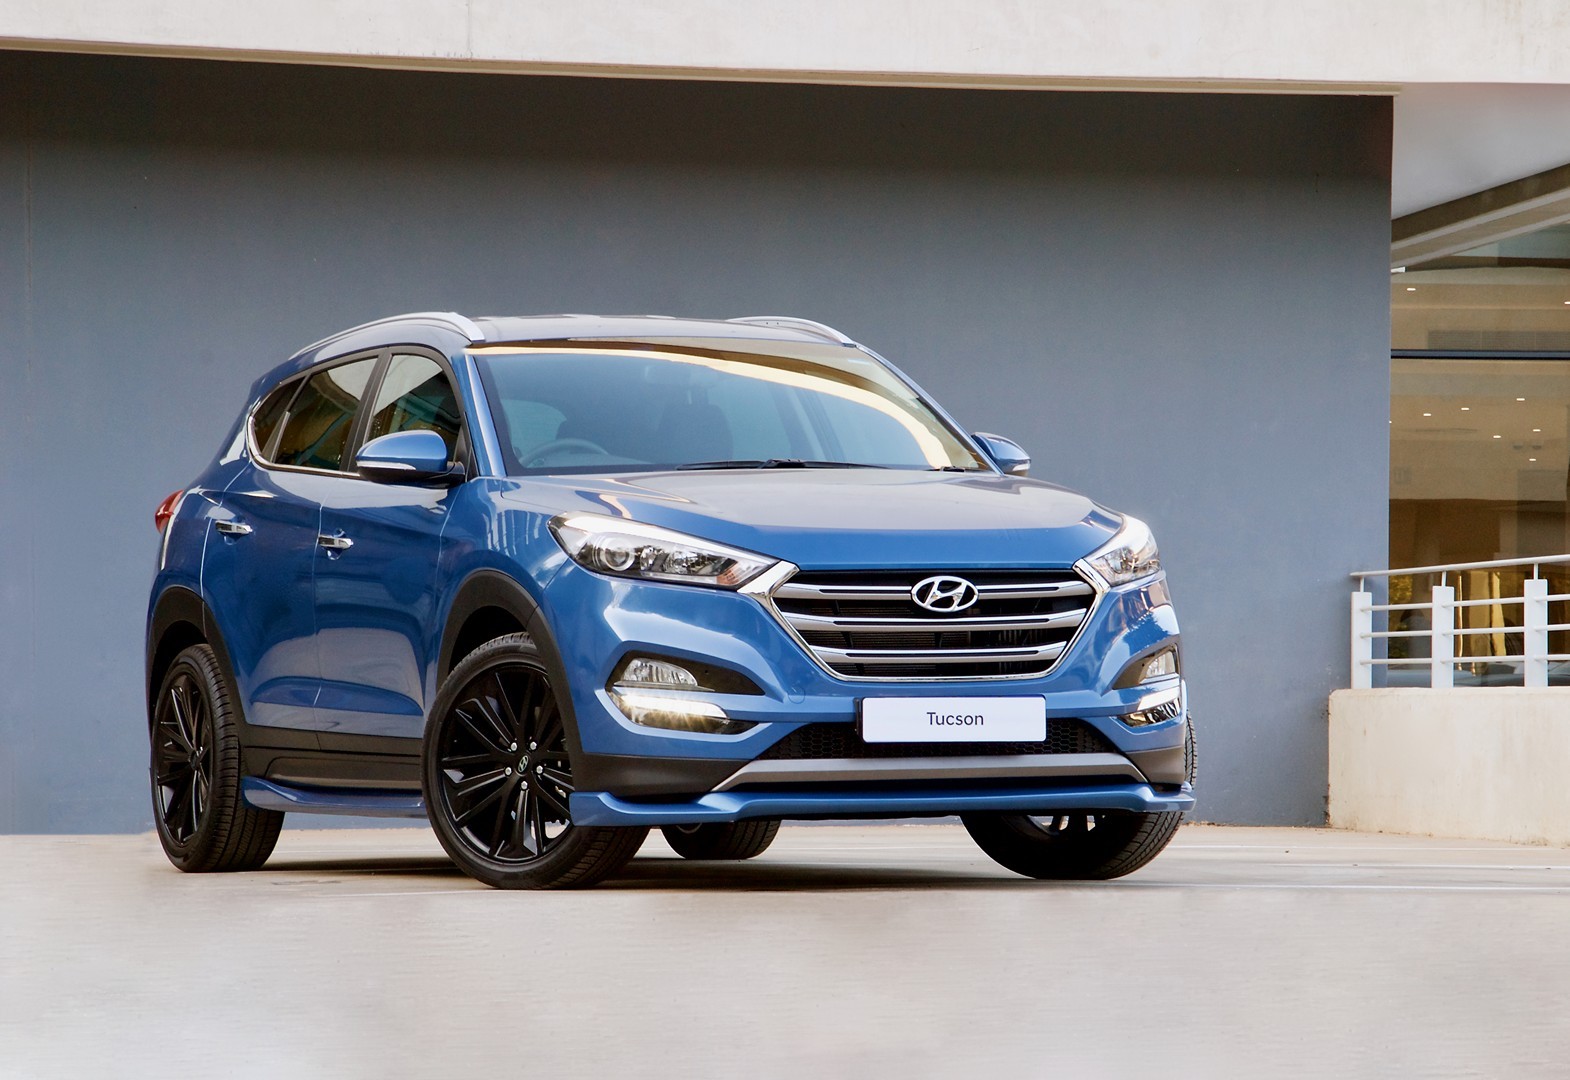 Hyundai Tucson N Expected With 340 Horsepower, i20 N Coming In 2020